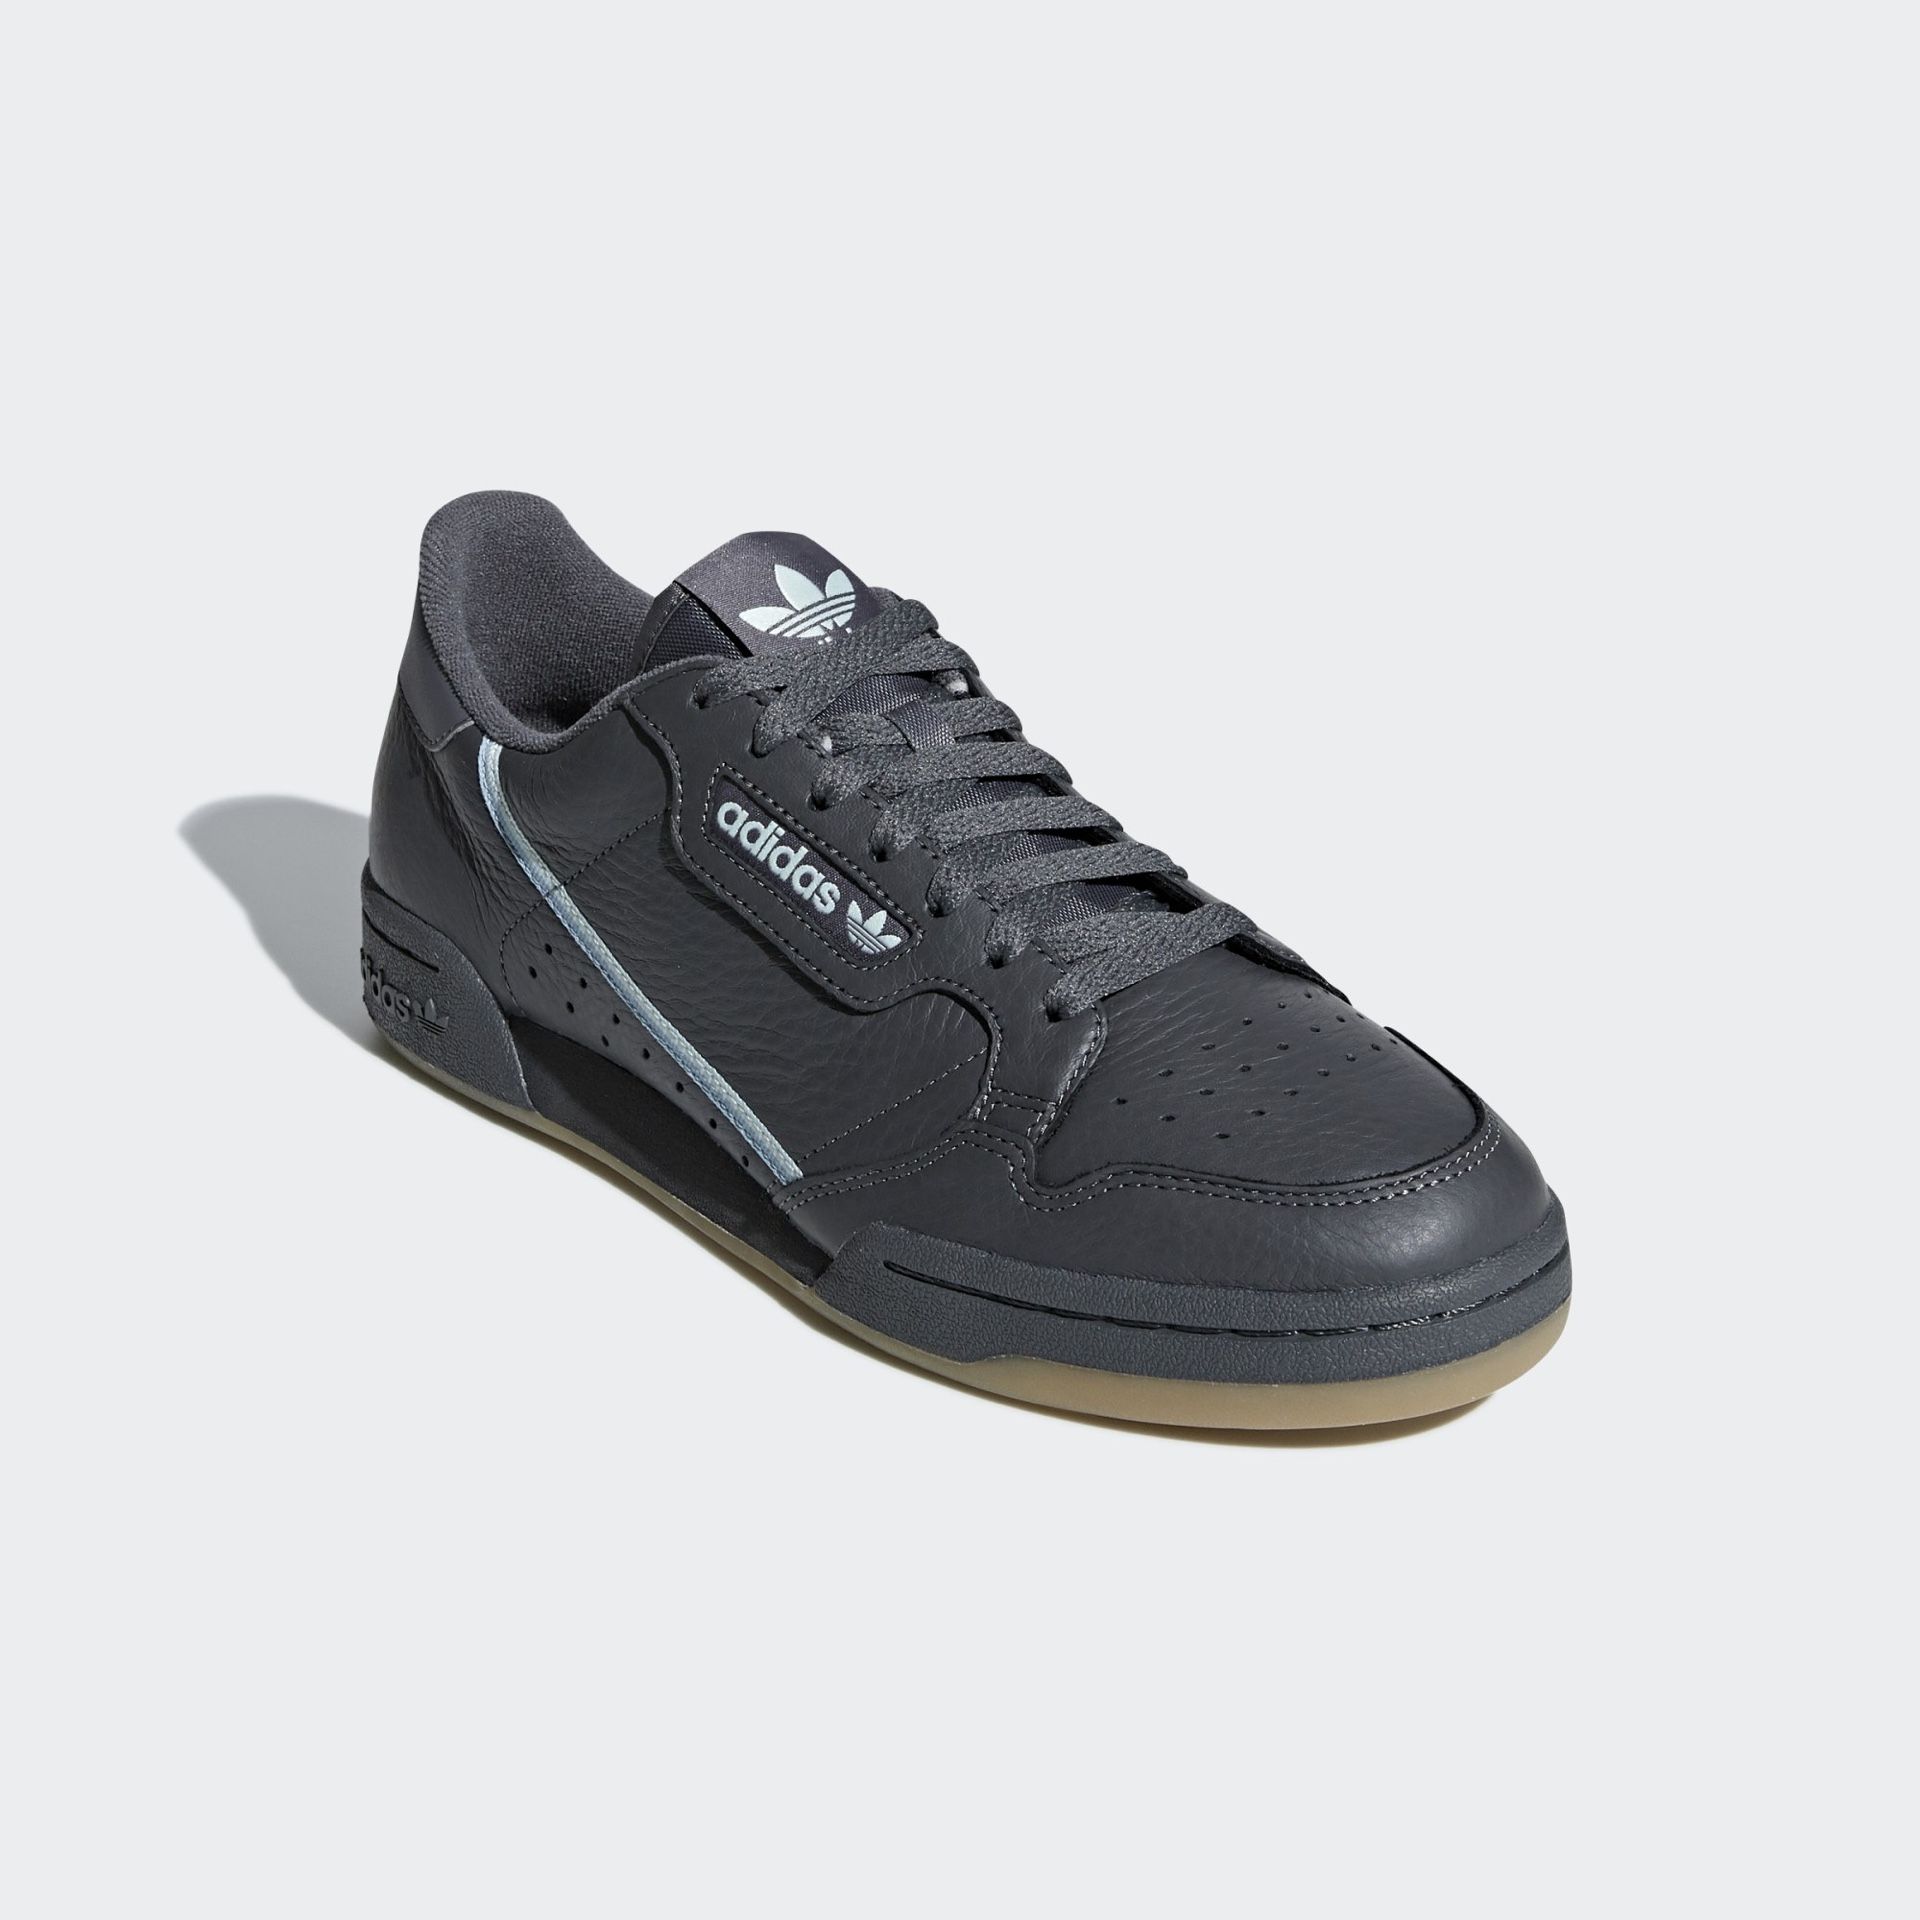 Adidas Continental Mens size 13 NEW $60